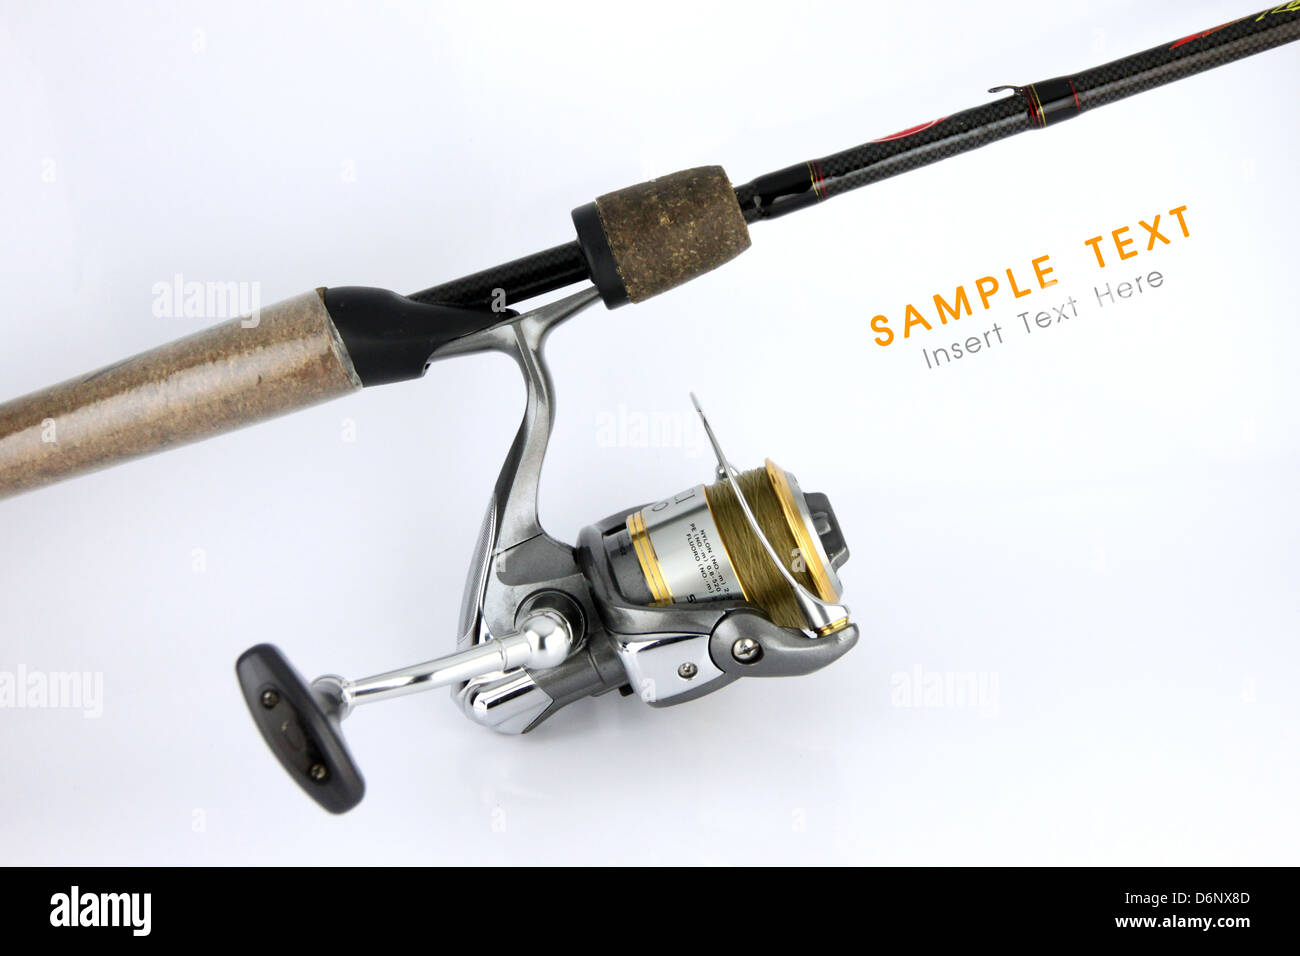 The Fishing rod with reel on white background. Stock Photo